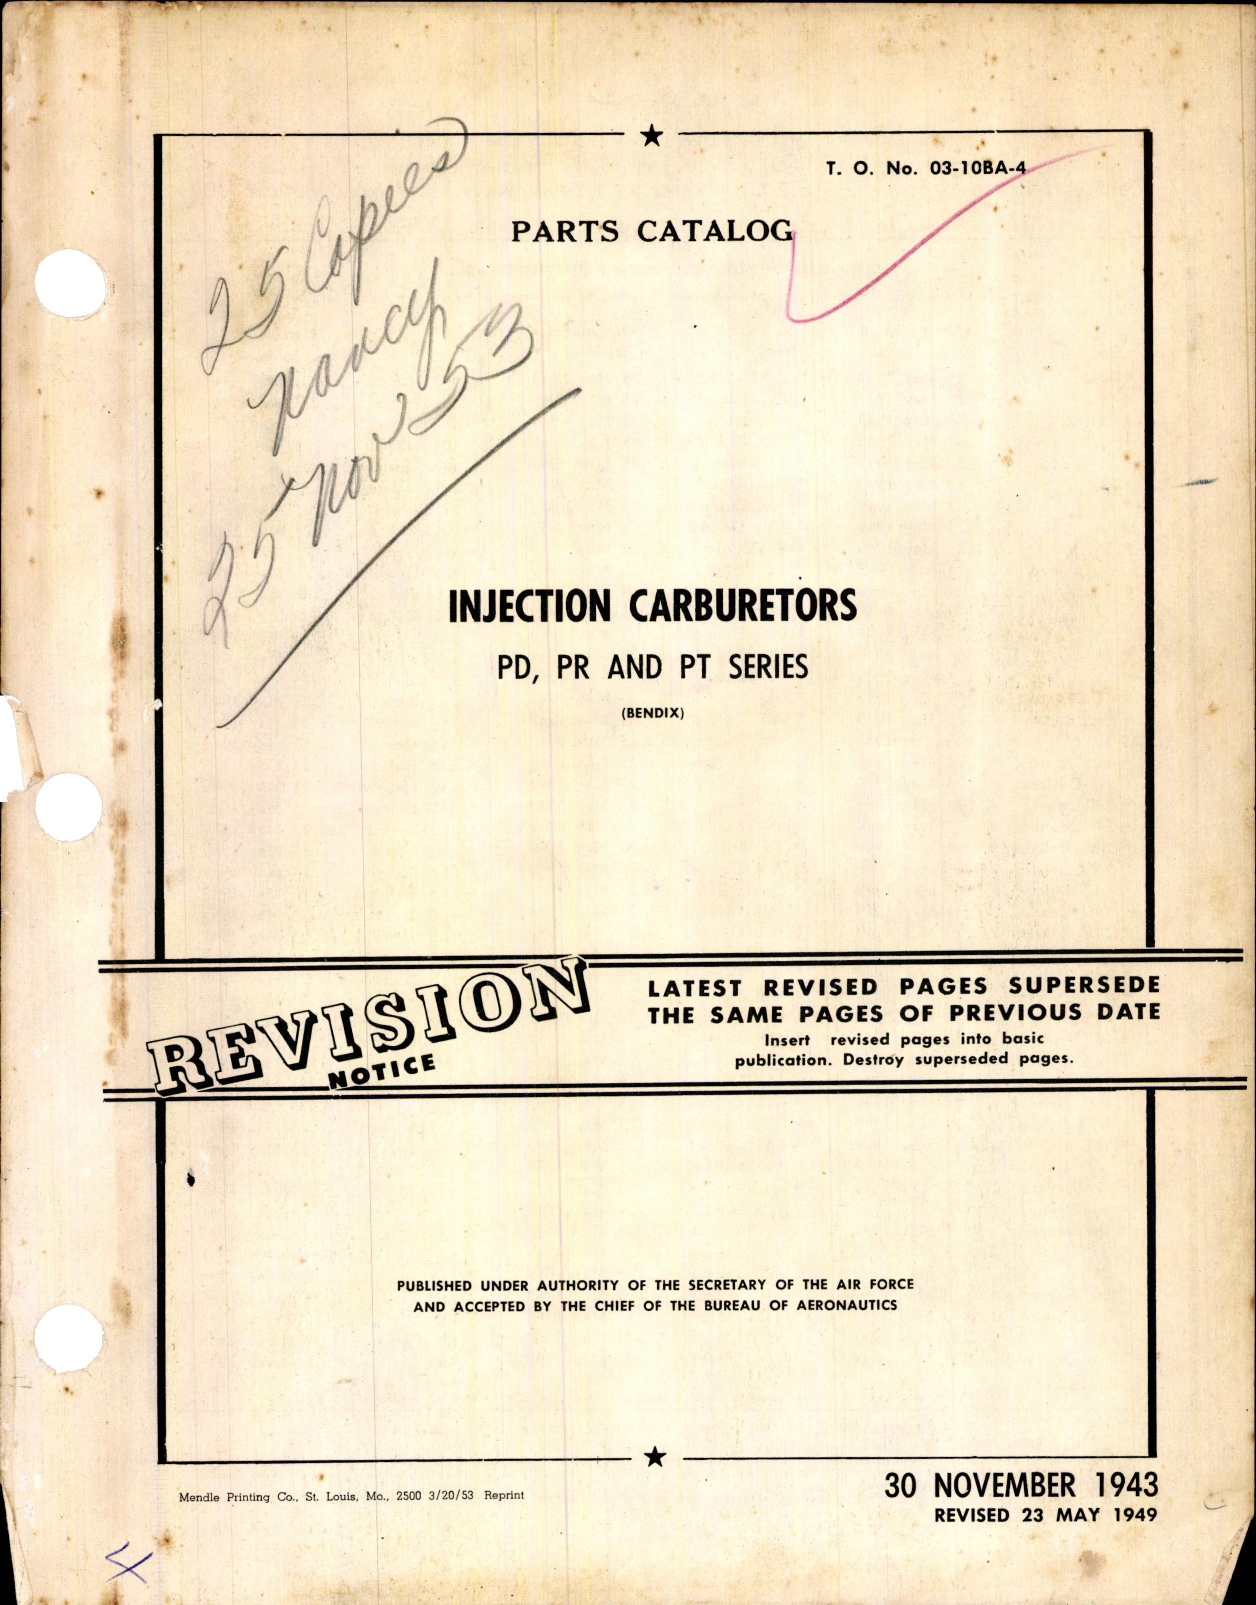 Sample page 1 from AirCorps Library document: Parts Catalog for Injection Carburetors PD, PR, and PT Series